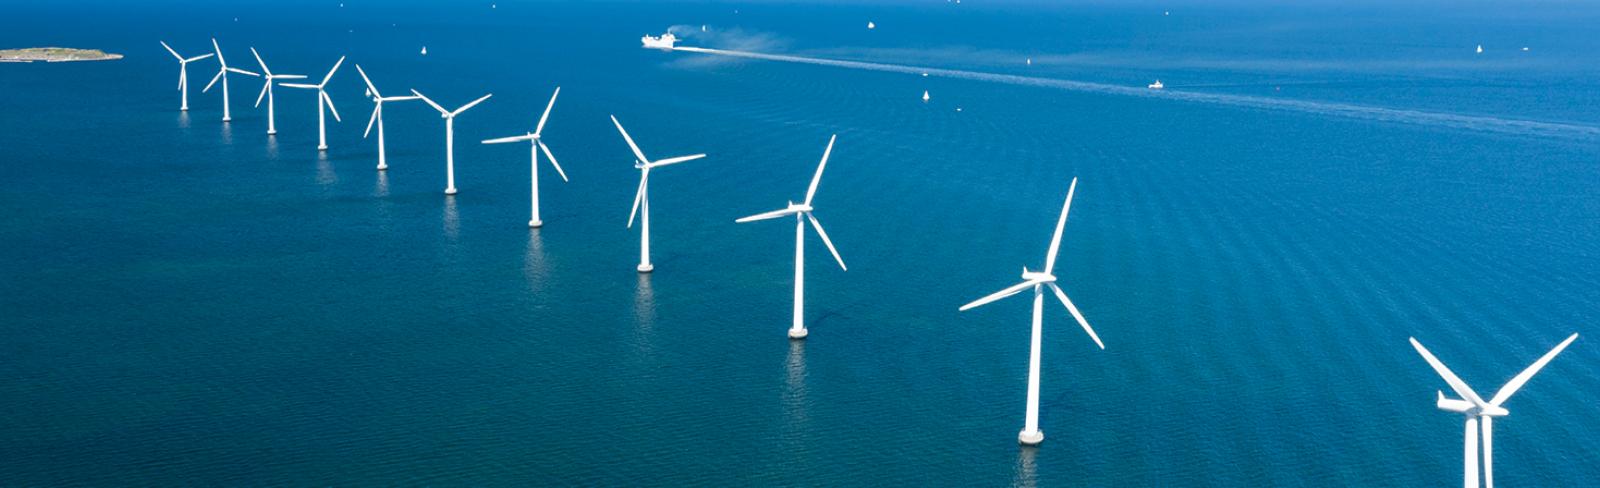 Key Factors for Successful Development of Offshore Wind in Emerging Markets